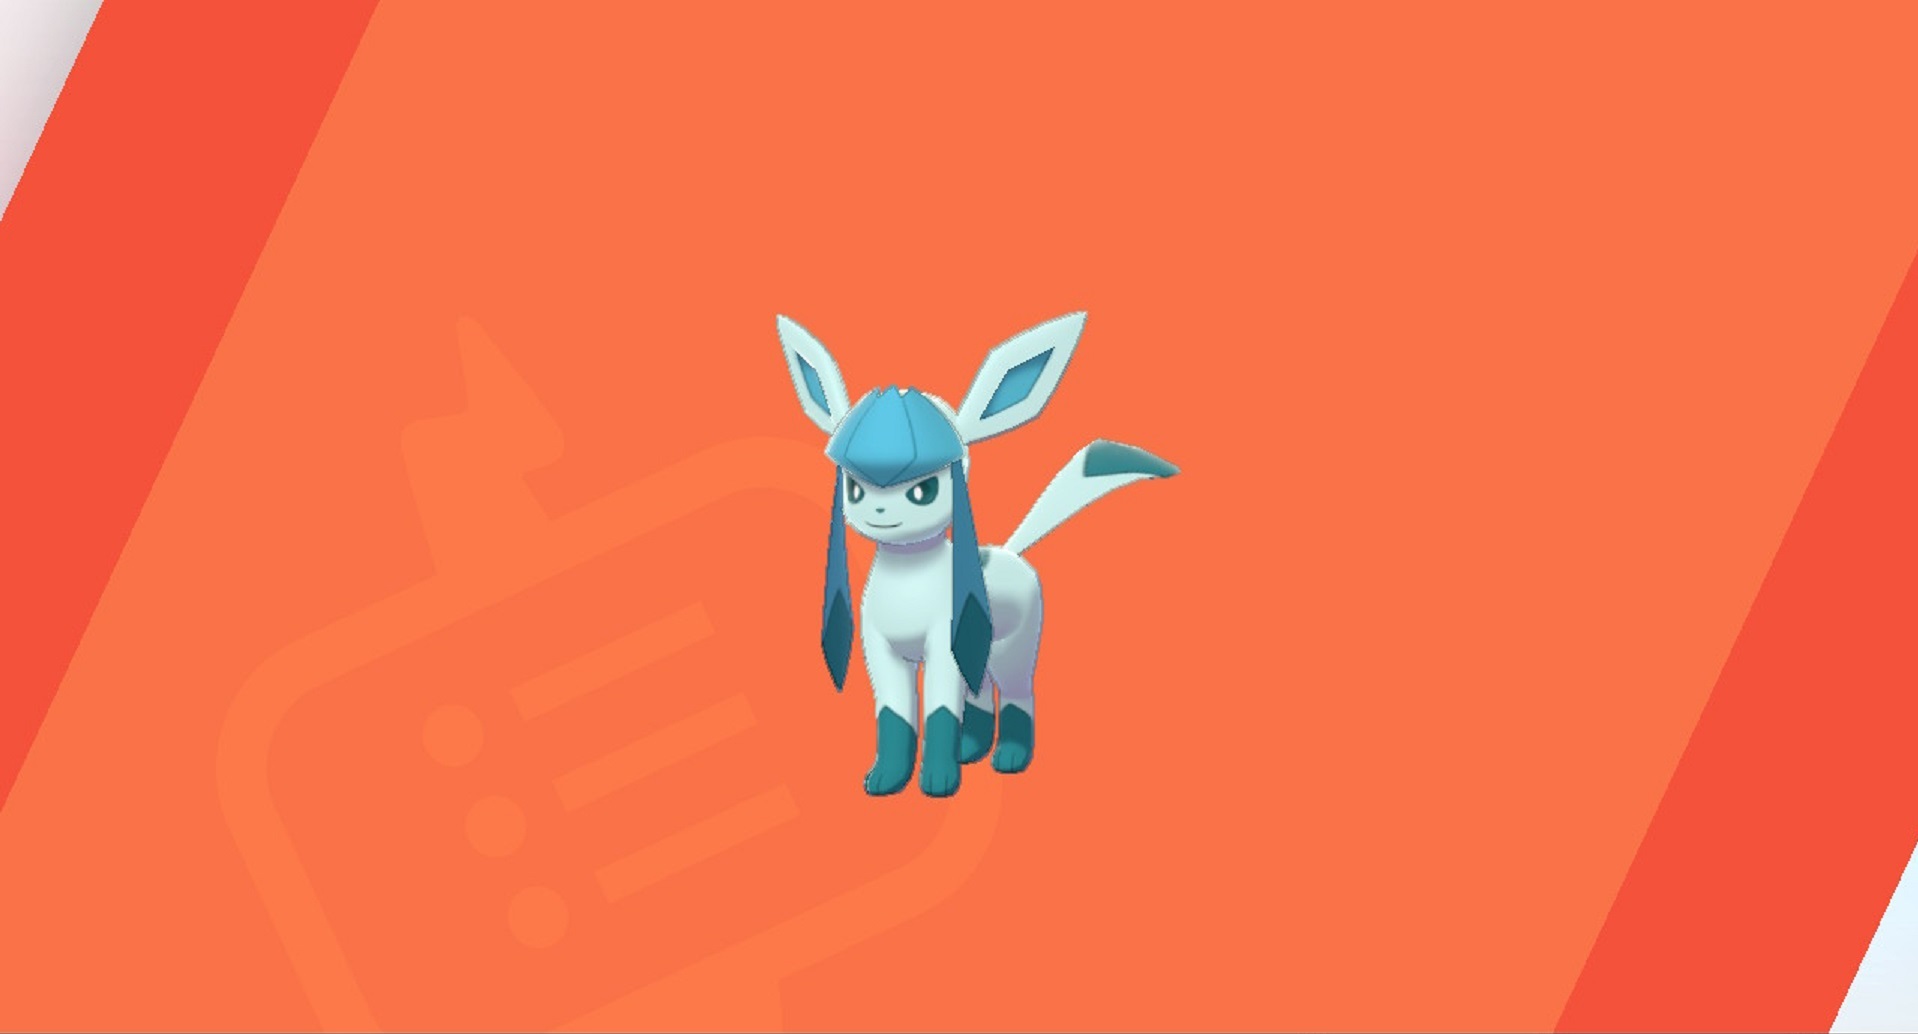 Pokémon Eevee evolutions: Glaceon against a red background.